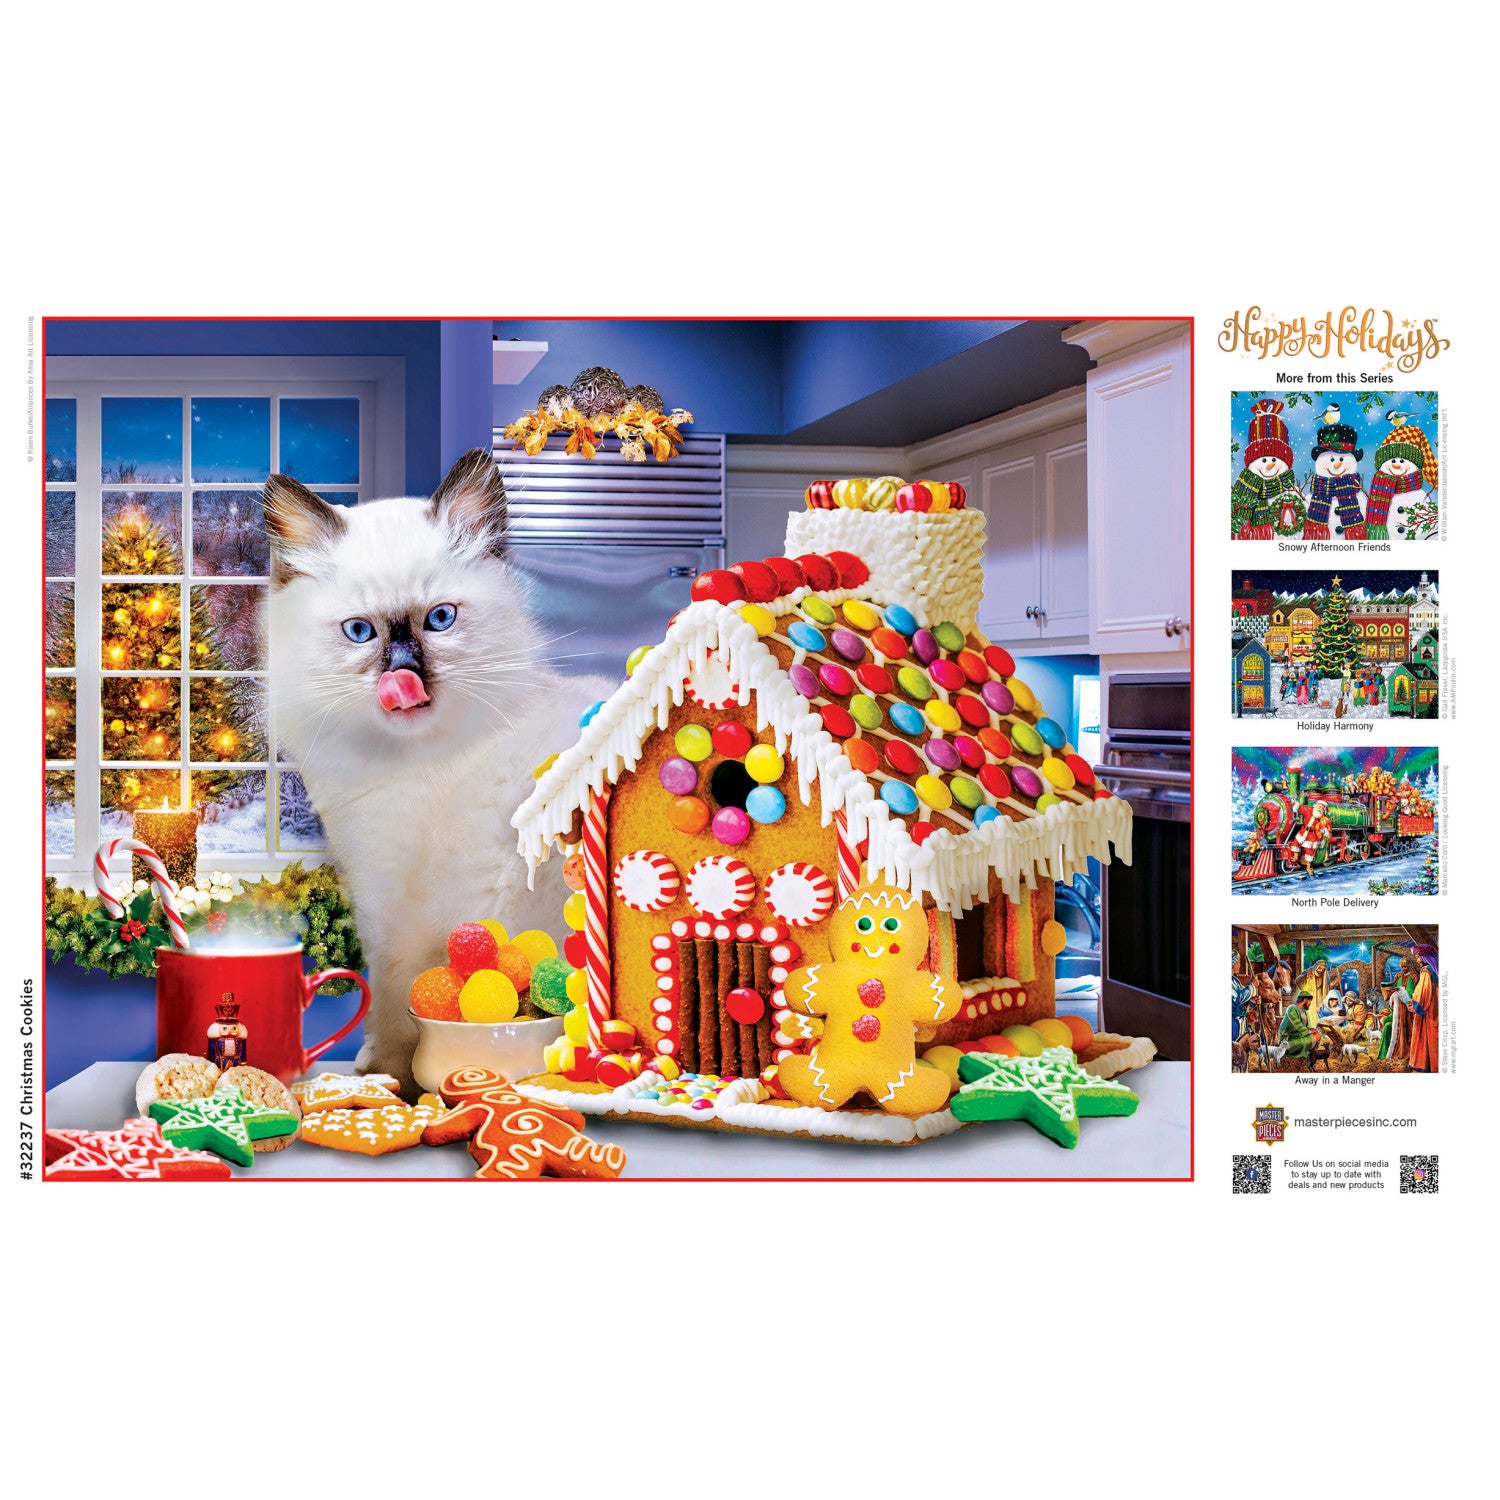 Christmas - Christmas Cookies 300 Piece Puzzle